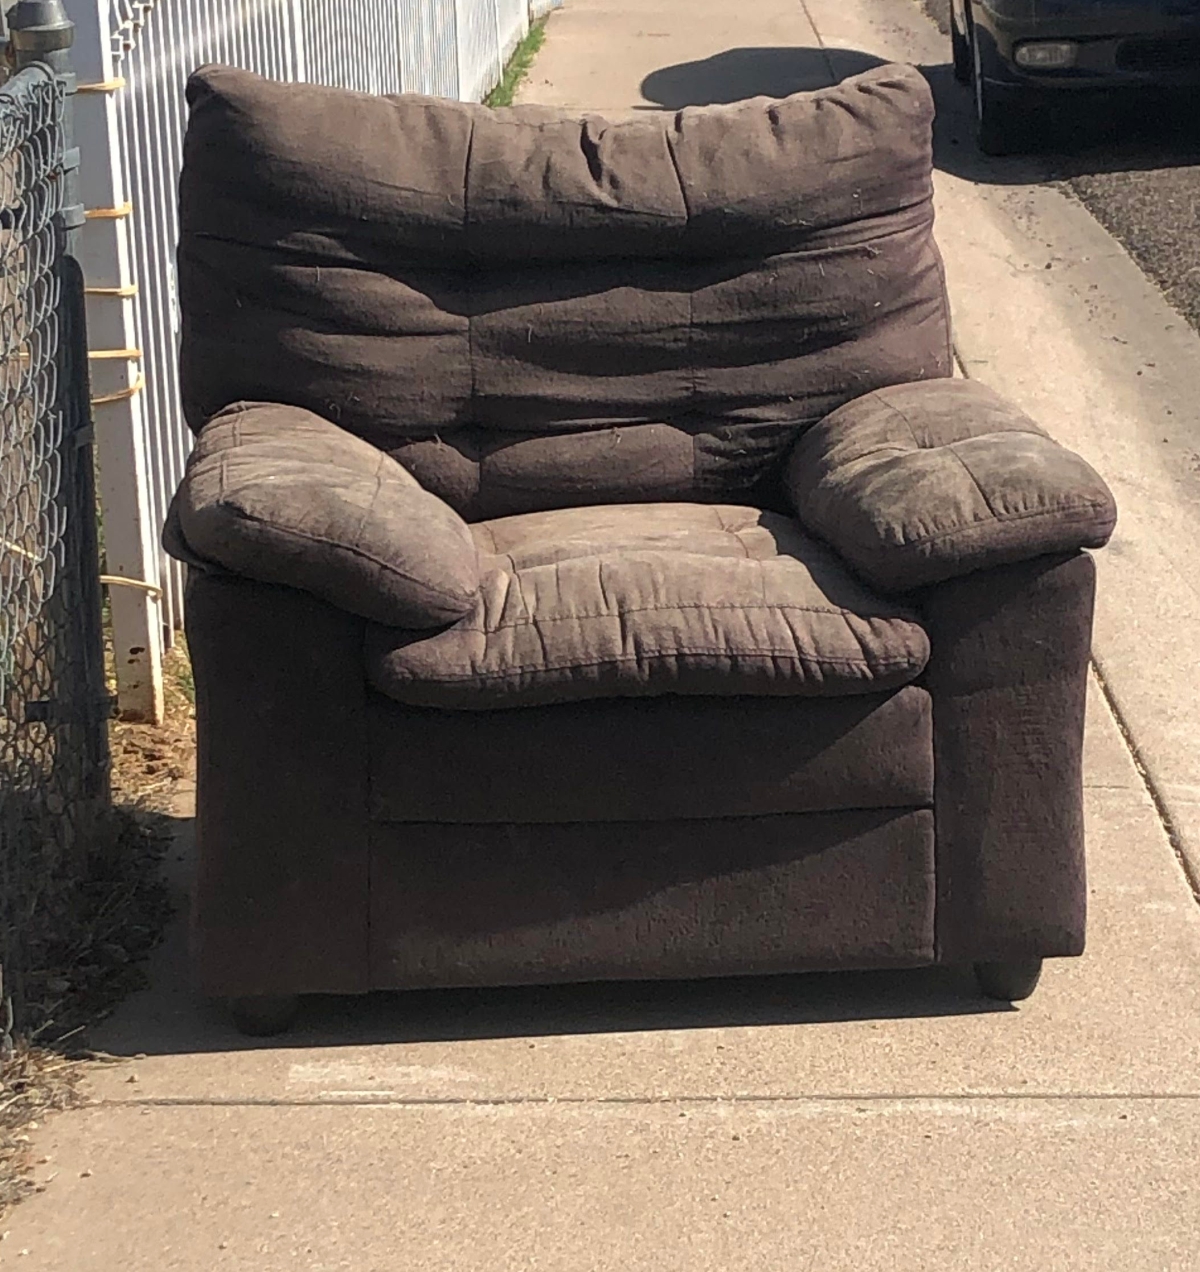 The Recliner on the Sidewalk